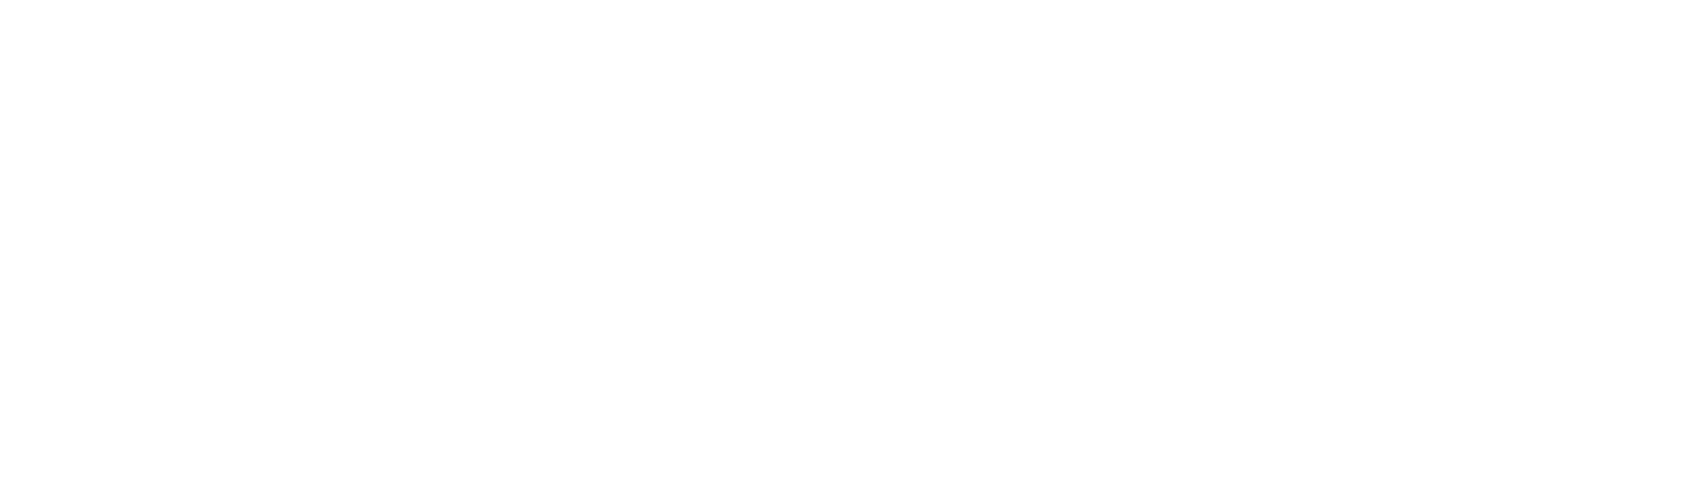 ROOFTOP 天体観測